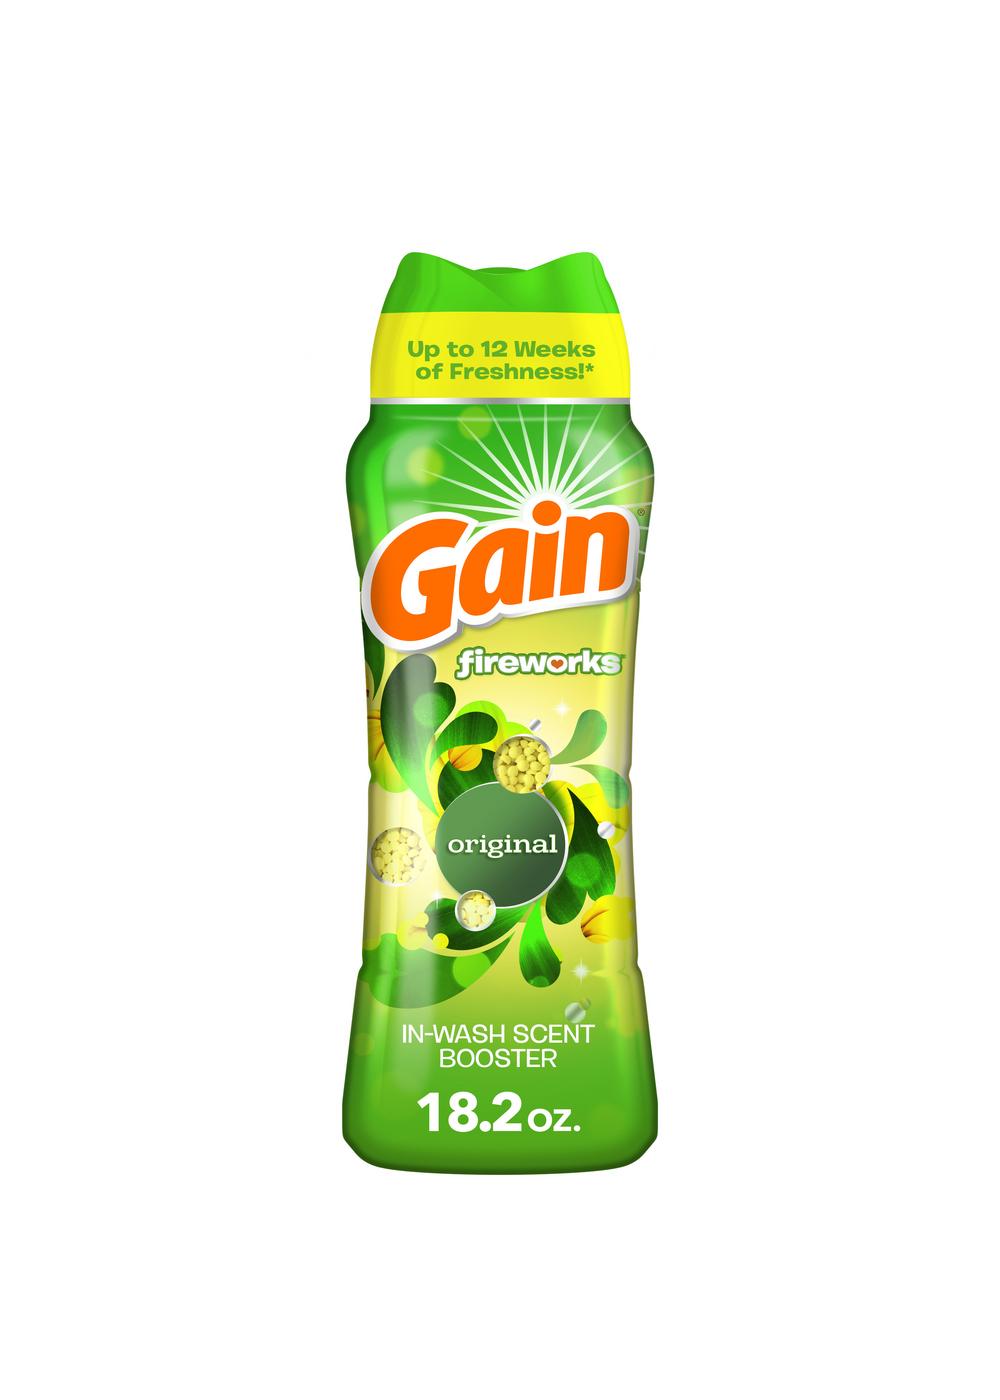 Gain Fireworks In-Wash Scent Booster - Original; image 1 of 7